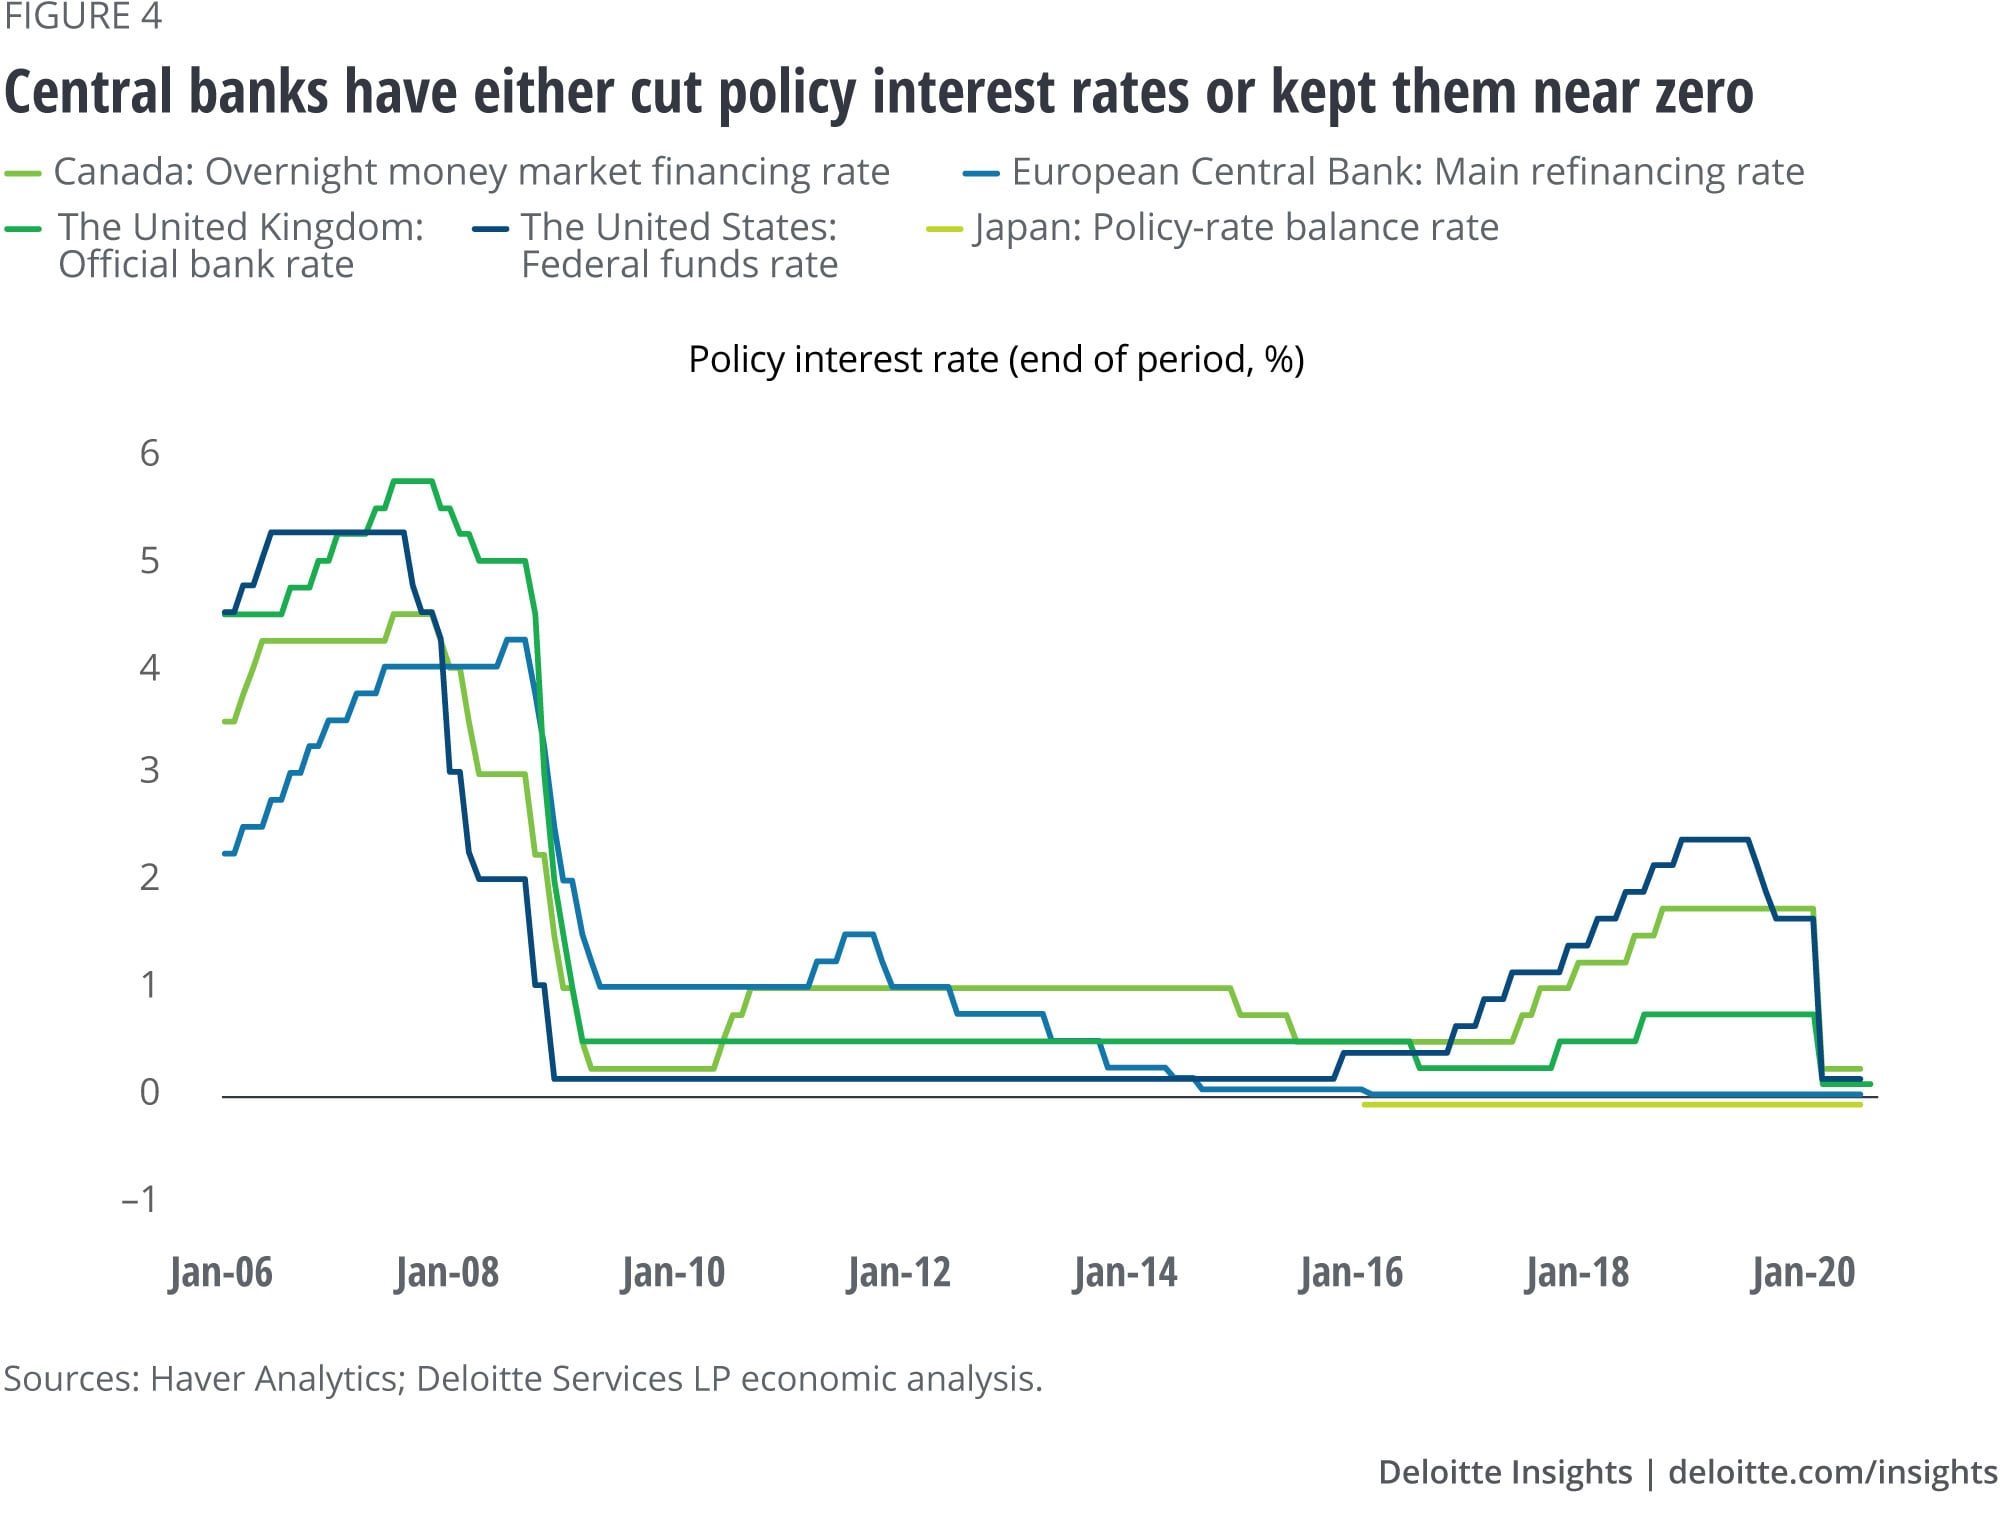 Central banks have either cut policy interest rates or kept them near zero